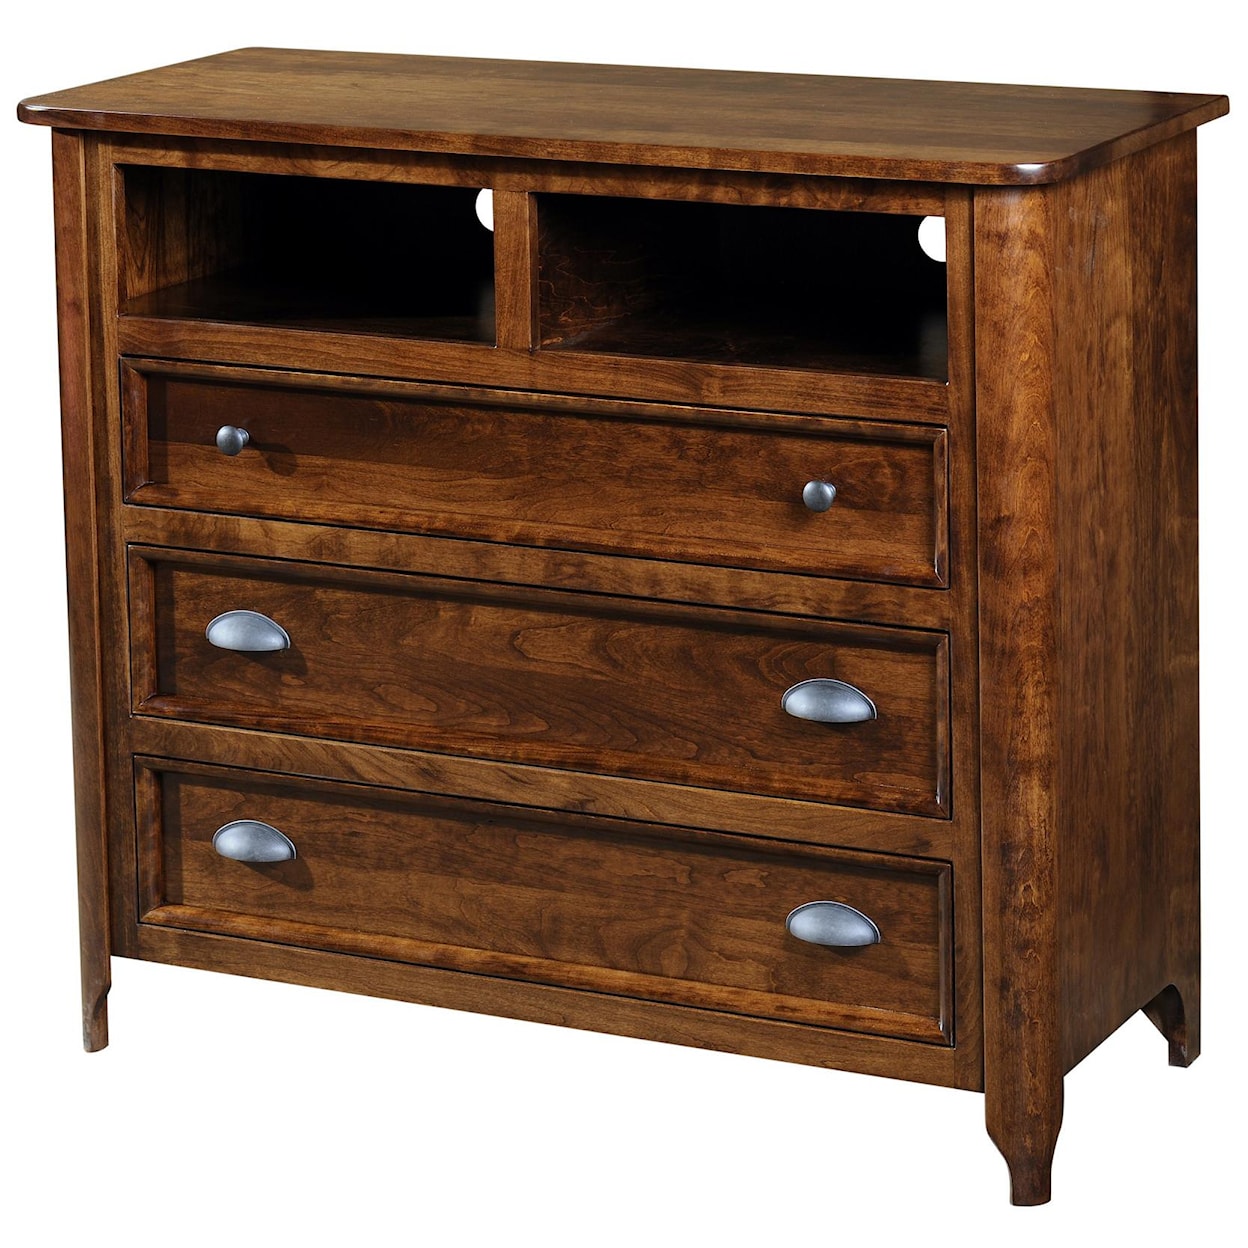 The Urban Collection Hudson  Media Chest